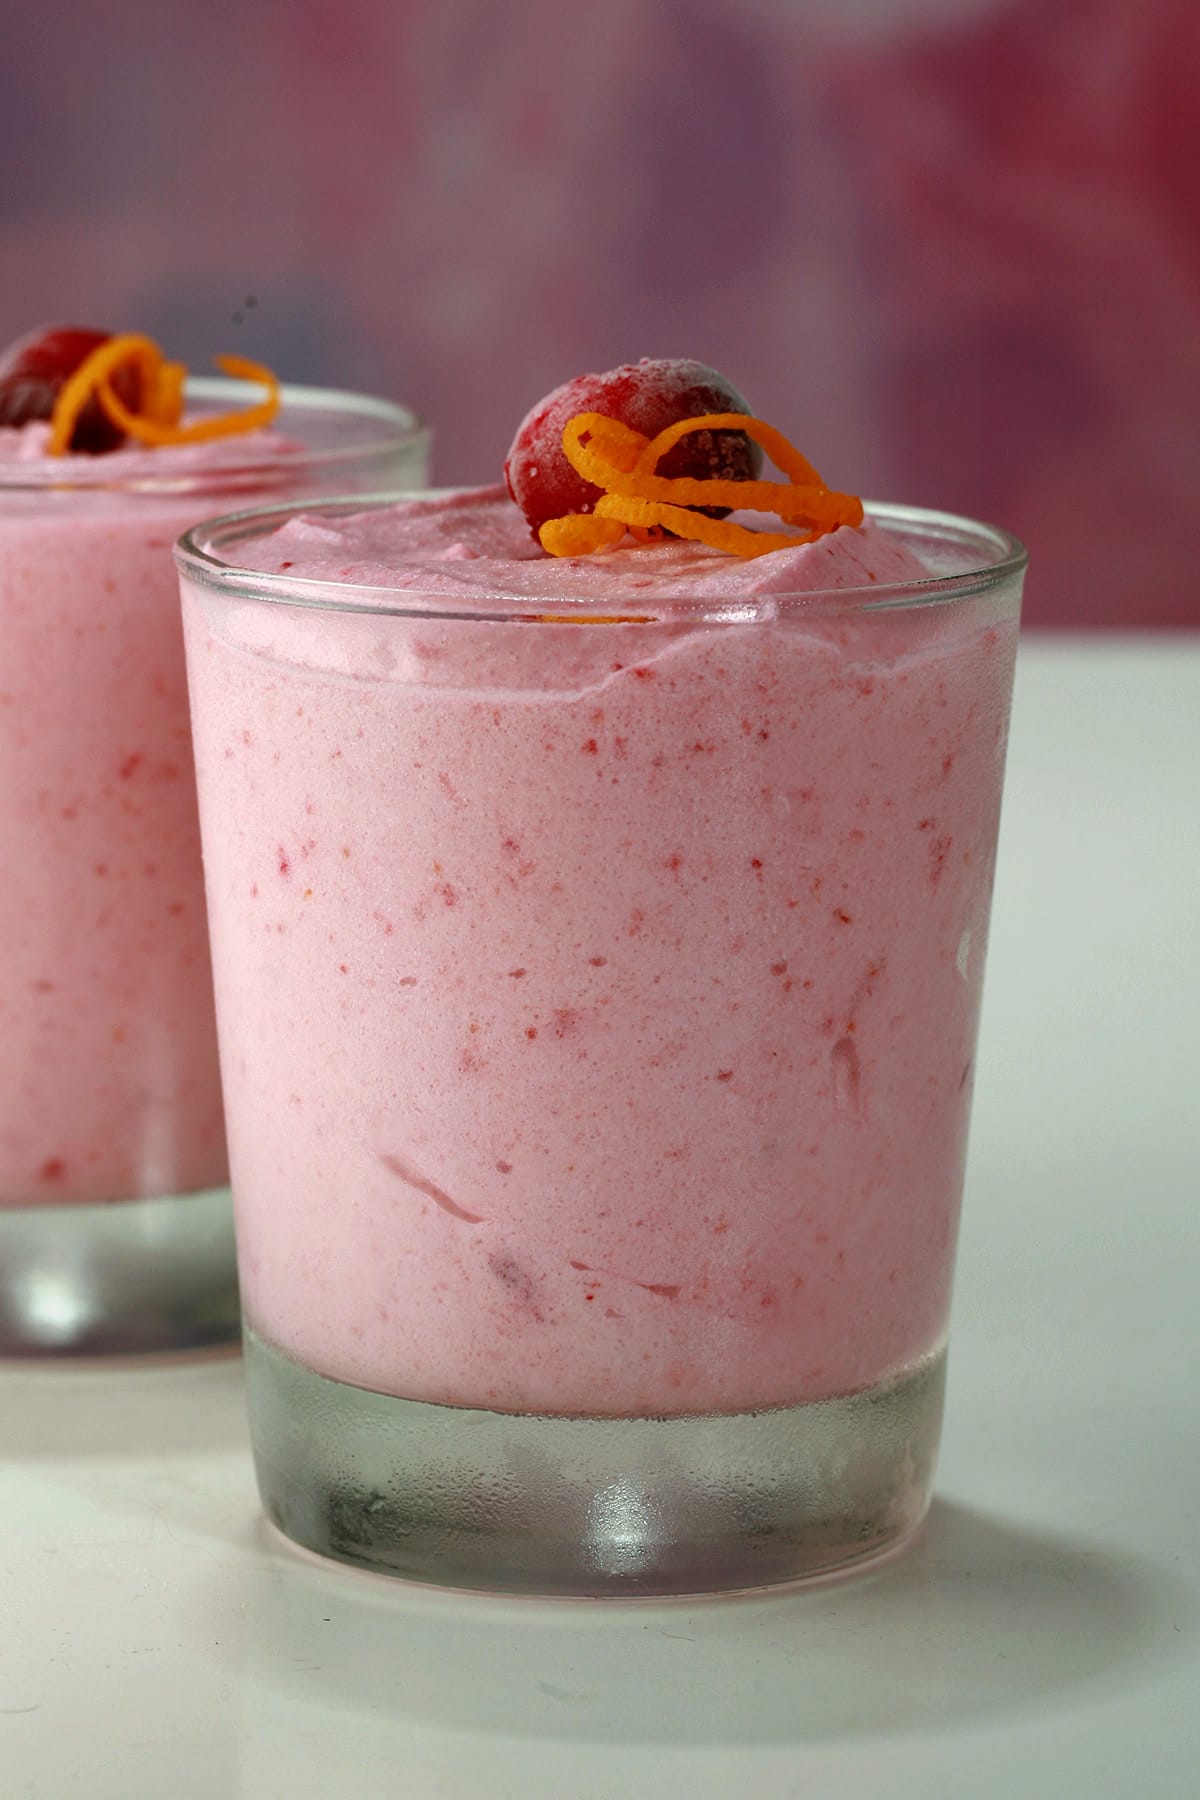 Cranberry Mousse Recipe: Delight in a Berrylicious Dessert!